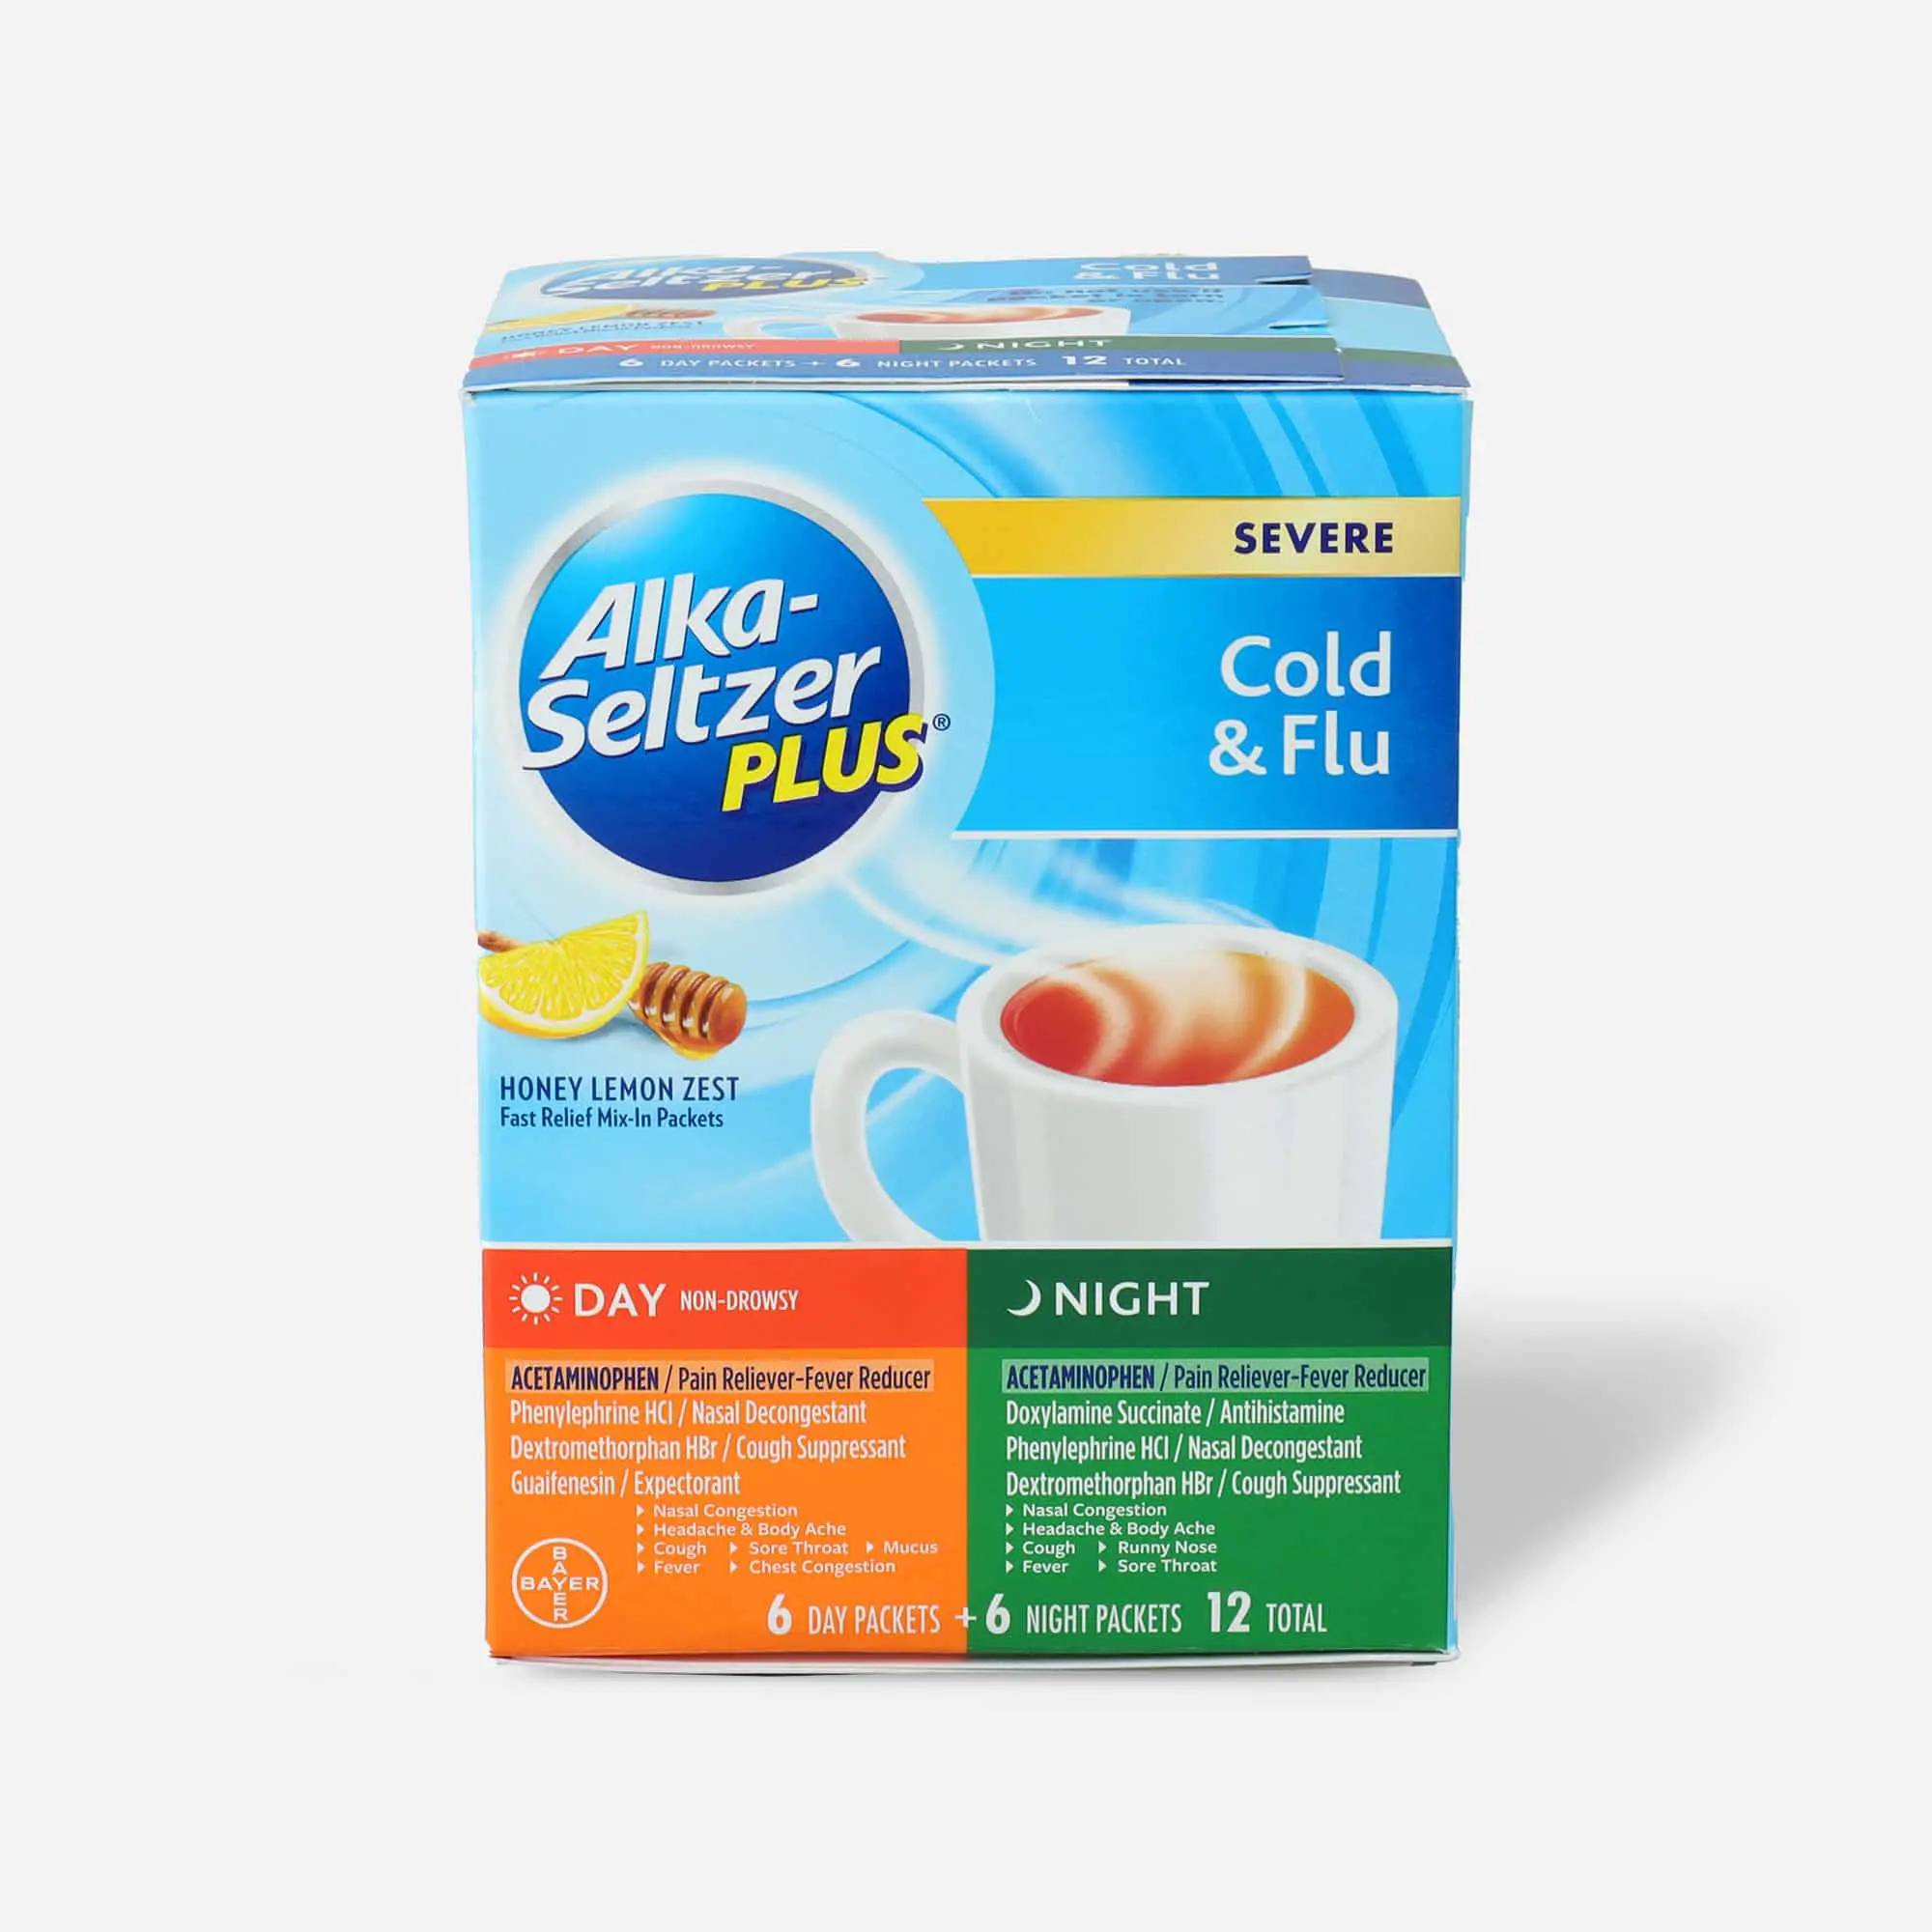 Can I Take Alka Seltzer Cold While Pregnant